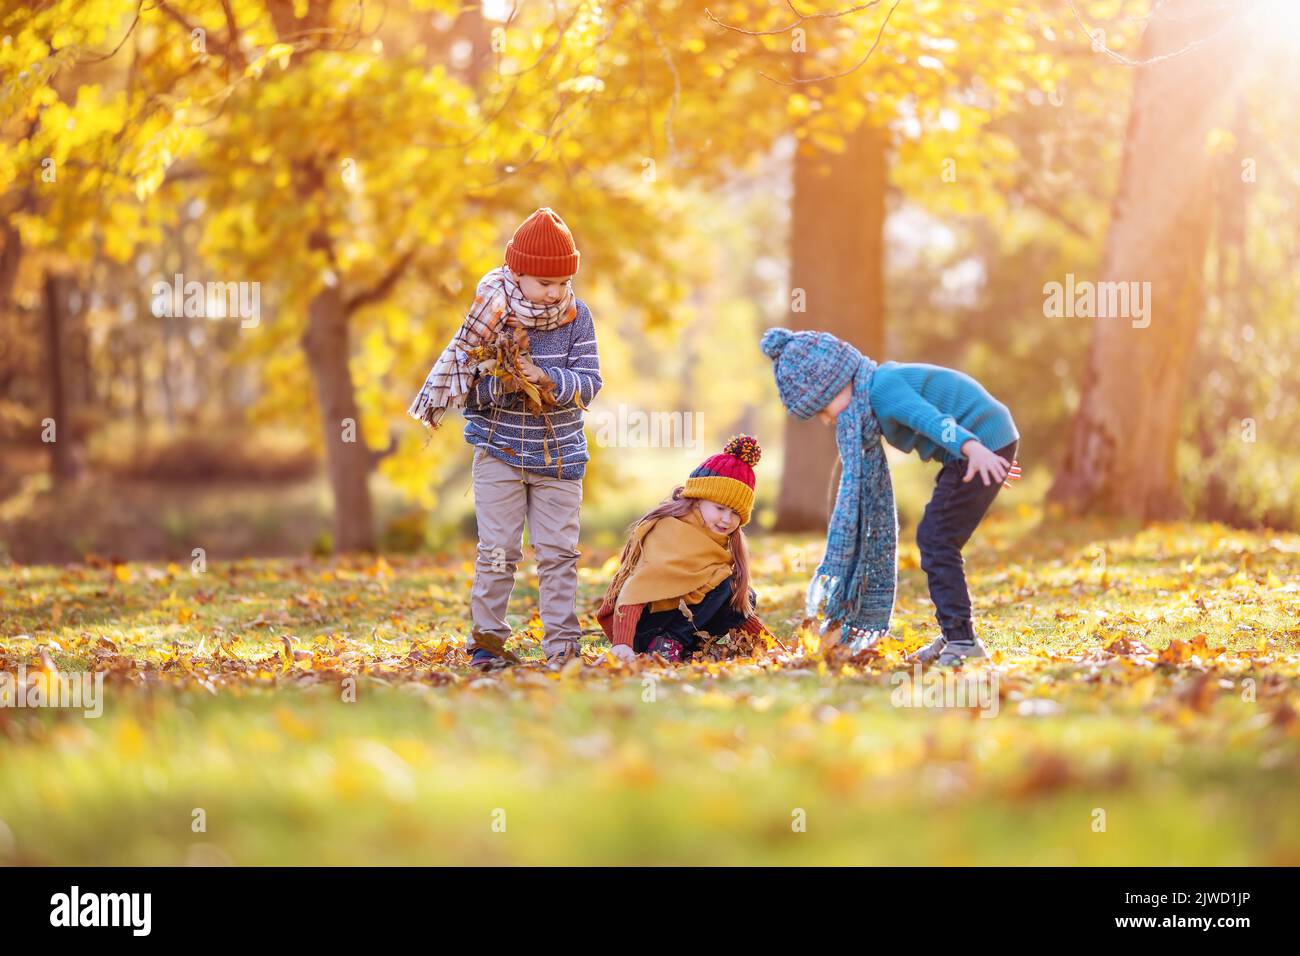 Children playing together in colourful natural park in autumnal day Stock Photo